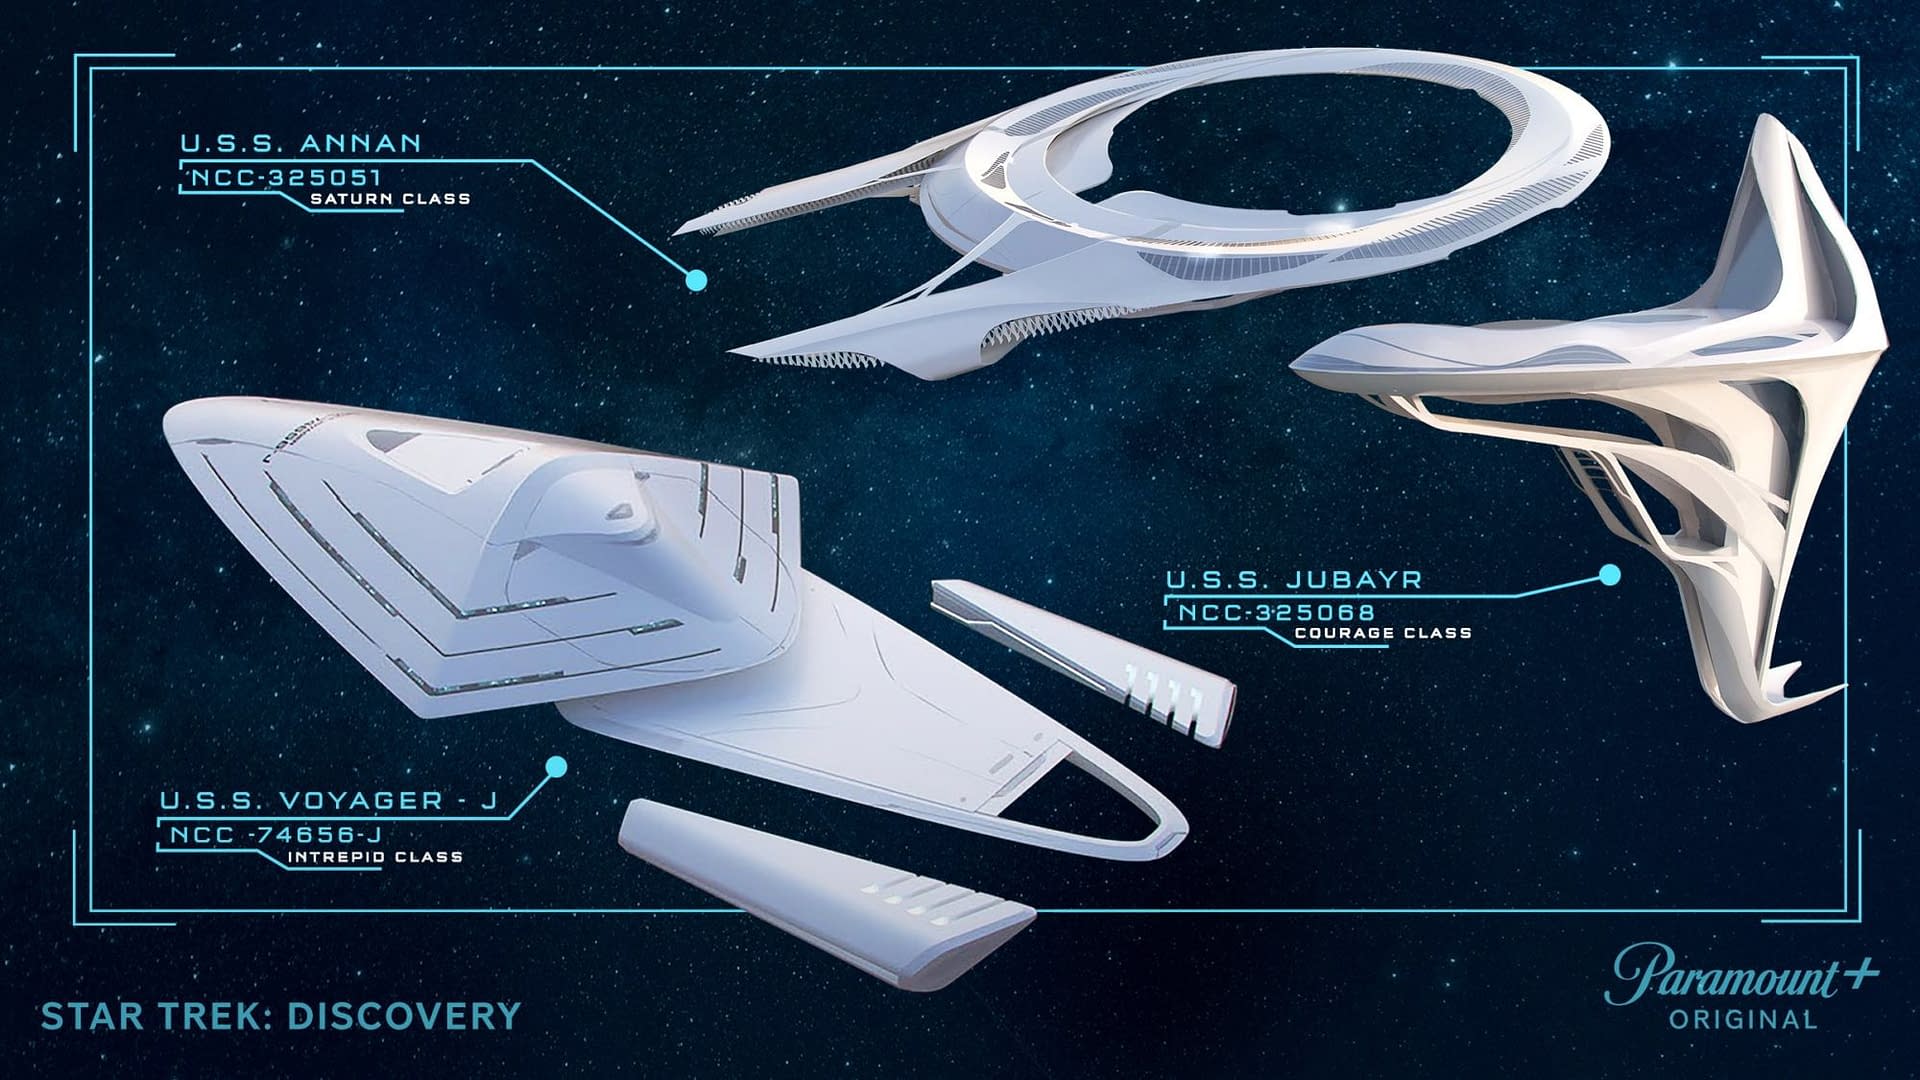 Paramount+ Posts Star Trek: Discovery New Federation Ships Concept Art